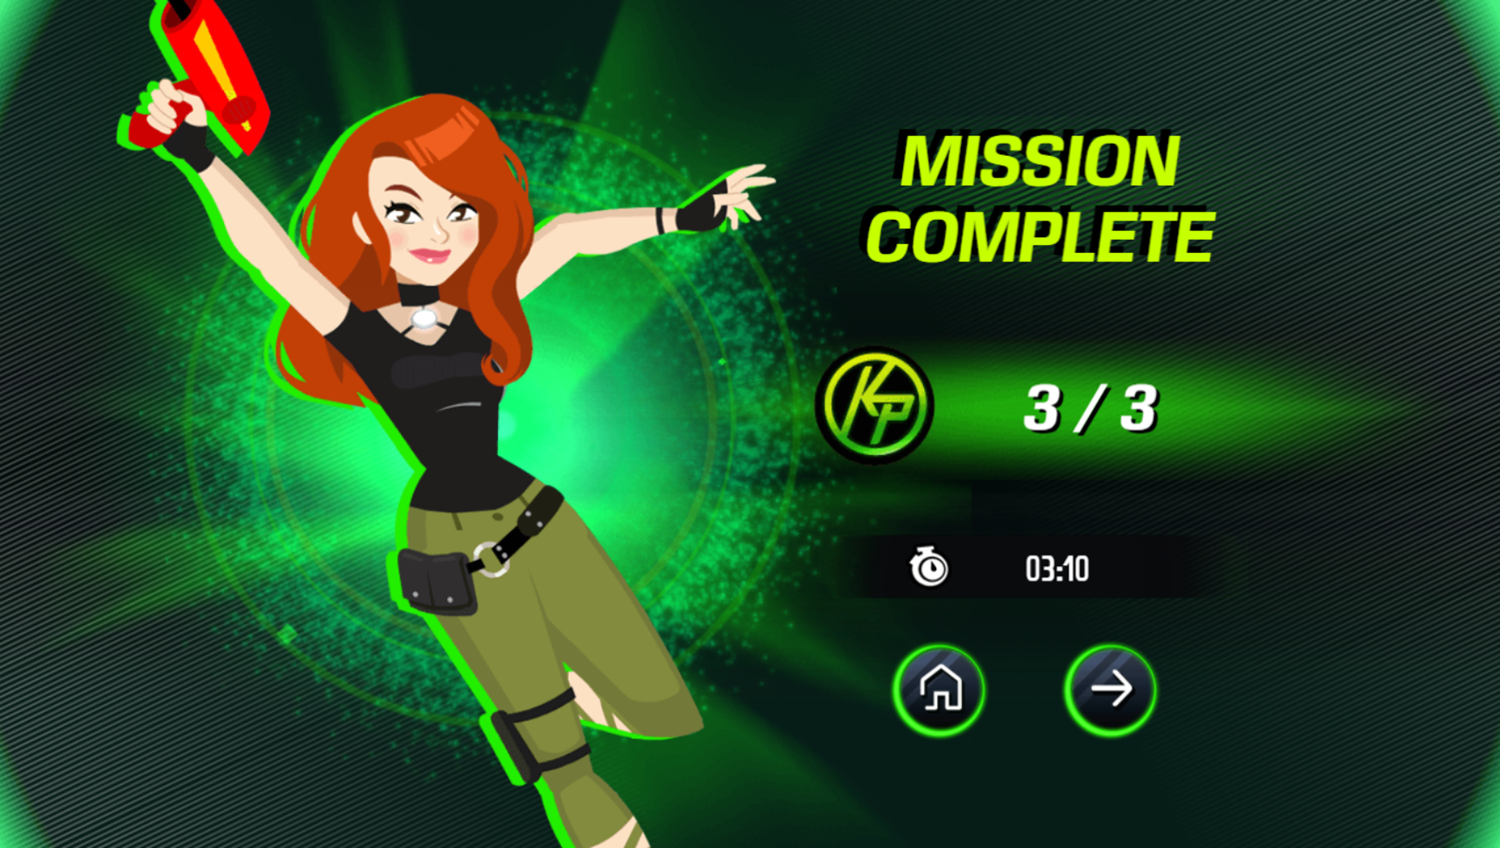 Kim Possible Mission Improbable Game Mission Complete Screenshot.